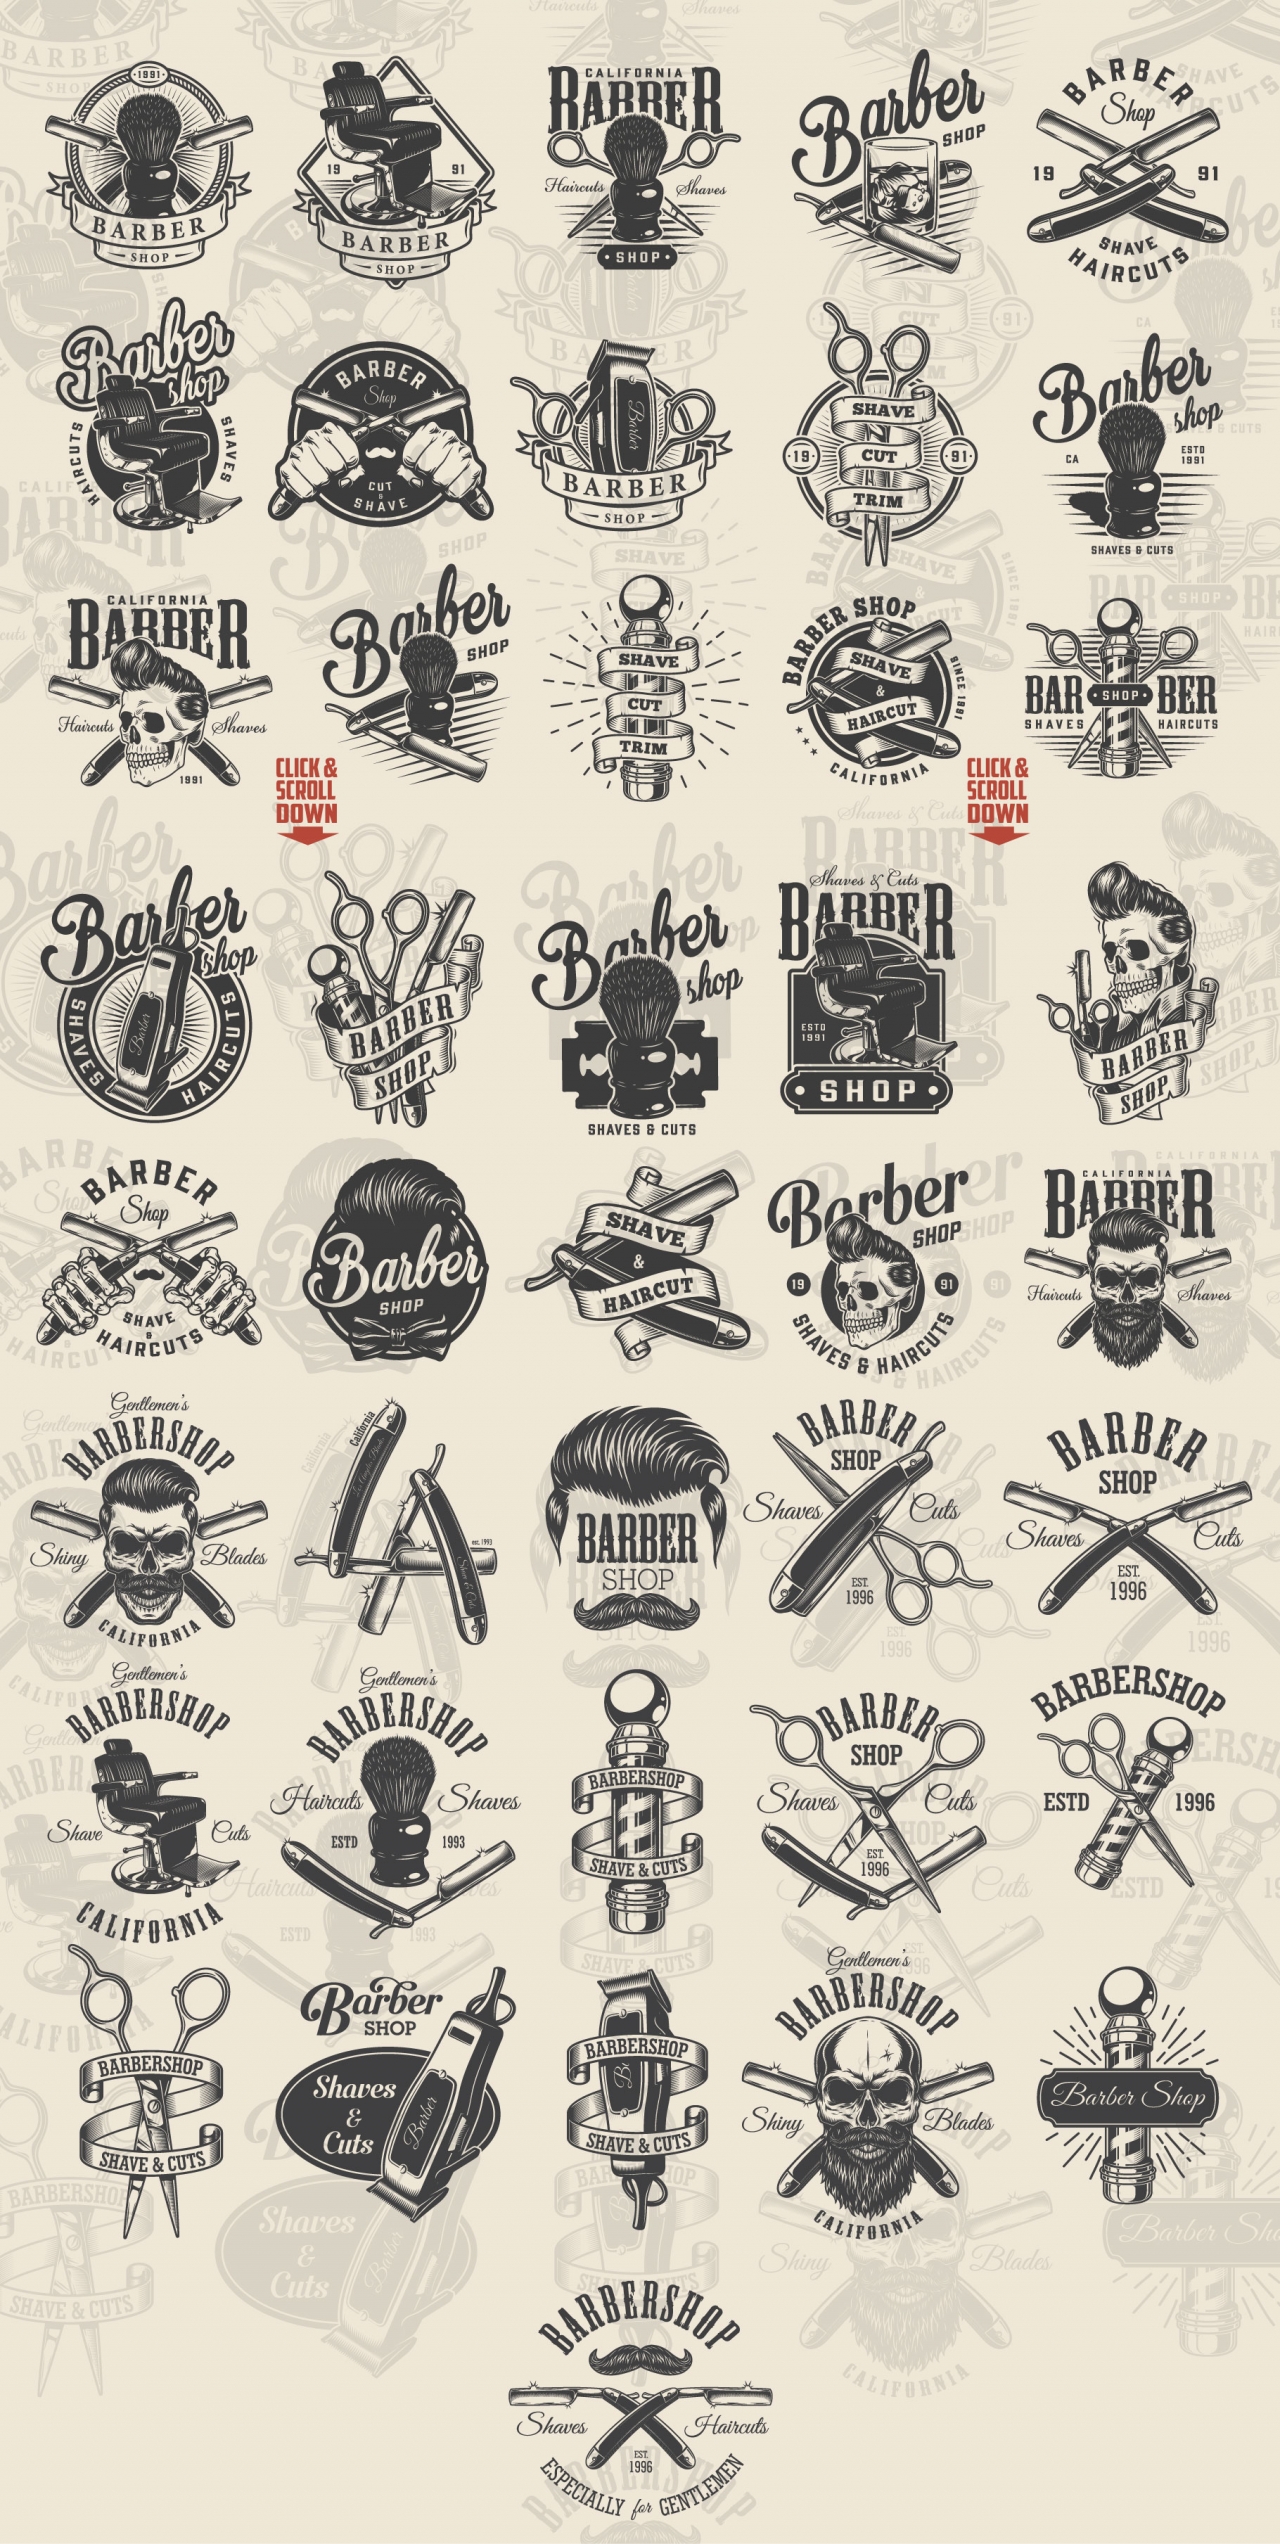 Barbershop designs great collection with vintage labels, emblems, badges, prints in monochrome style on light background